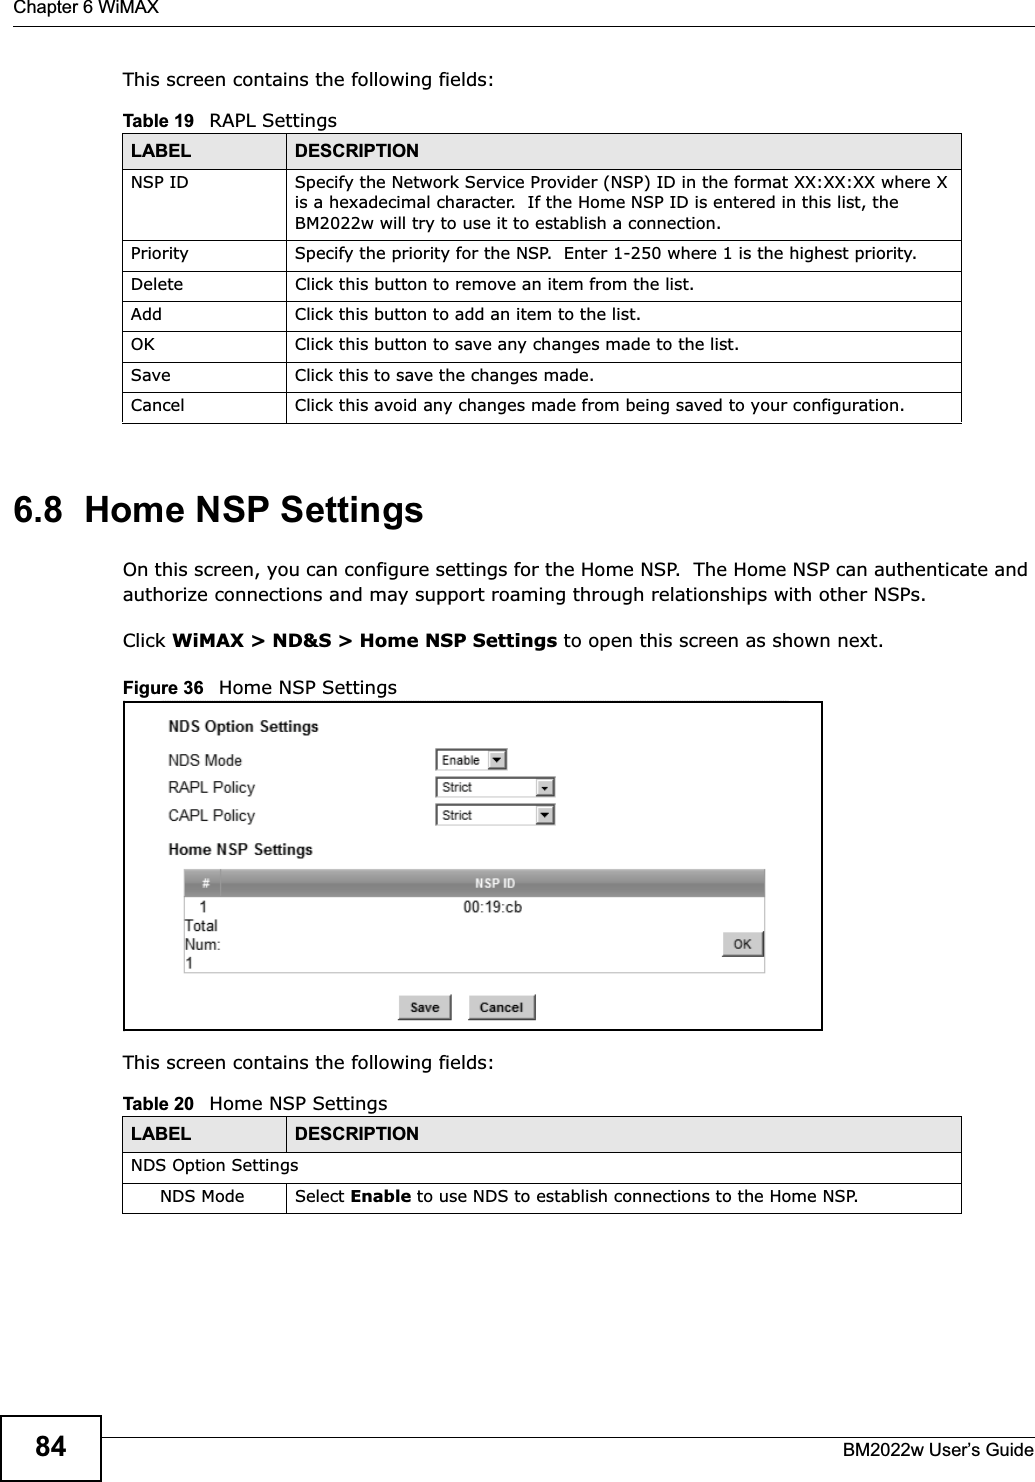 Chapter 6 WiMAXBM2022w User’s Guide84This screen contains the following fields:6.8  Home NSP SettingsOn this screen, you can configure settings for the Home NSP.  The Home NSP can authenticate and authorize connections and may support roaming through relationships with other NSPs.Click WiMAX &gt; ND&amp;S &gt; Home NSP Settings to open this screen as shown next.Figure 36   Home NSP SettingsThis screen contains the following fields:Table 19   RAPL SettingsLABEL DESCRIPTIONNSP ID Specify the Network Service Provider (NSP) ID in the format XX:XX:XX where X is a hexadecimal character.  If the Home NSP ID is entered in this list, the BM2022w will try to use it to establish a connection.Priority Specify the priority for the NSP.  Enter 1-250 where 1 is the highest priority.Delete Click this button to remove an item from the list.Add Click this button to add an item to the list.OK Click this button to save any changes made to the list.Save Click this to save the changes made.Cancel Click this avoid any changes made from being saved to your configuration.Table 20   Home NSP SettingsLABEL DESCRIPTIONNDS Option SettingsNDS Mode Select Enable to use NDS to establish connections to the Home NSP.